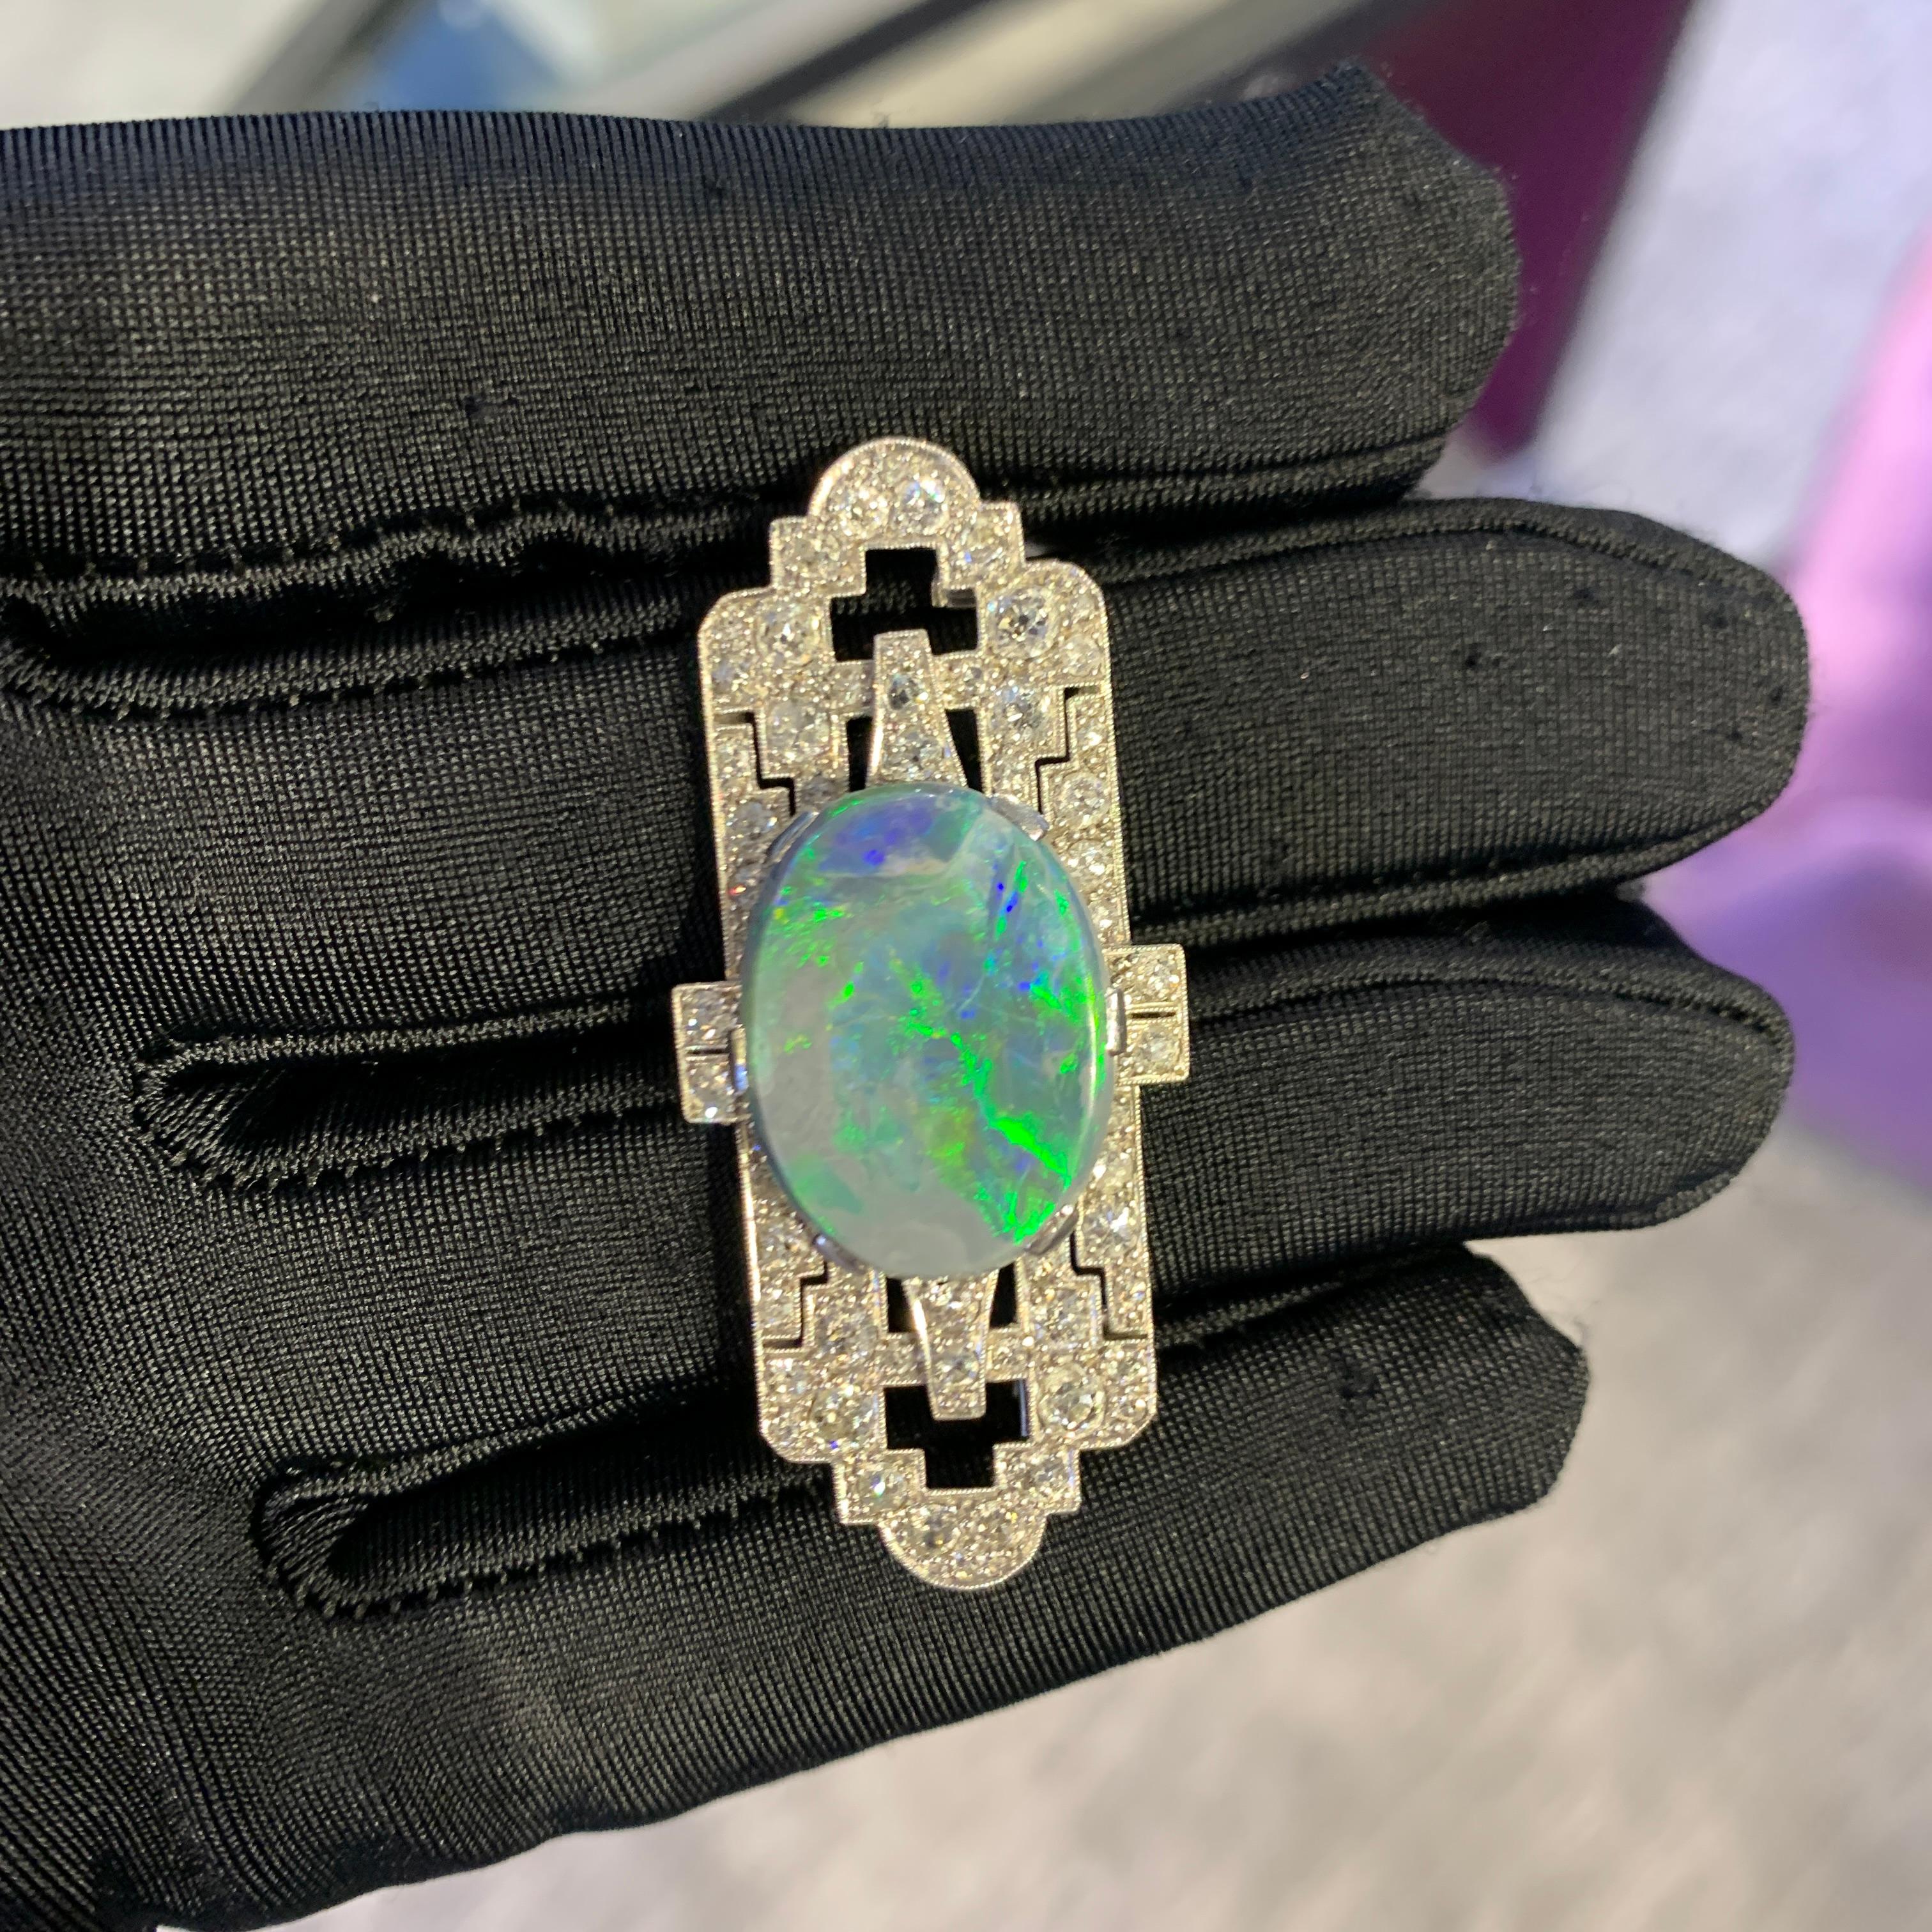 Art Deco Opal & Diamond Brooch

A platinum and 18 karat white gold brooch set with a center black opal weighing approximately 7.75 carats framed by approximately 3.35 carats of round cut diamonds

Measurements: 1.88